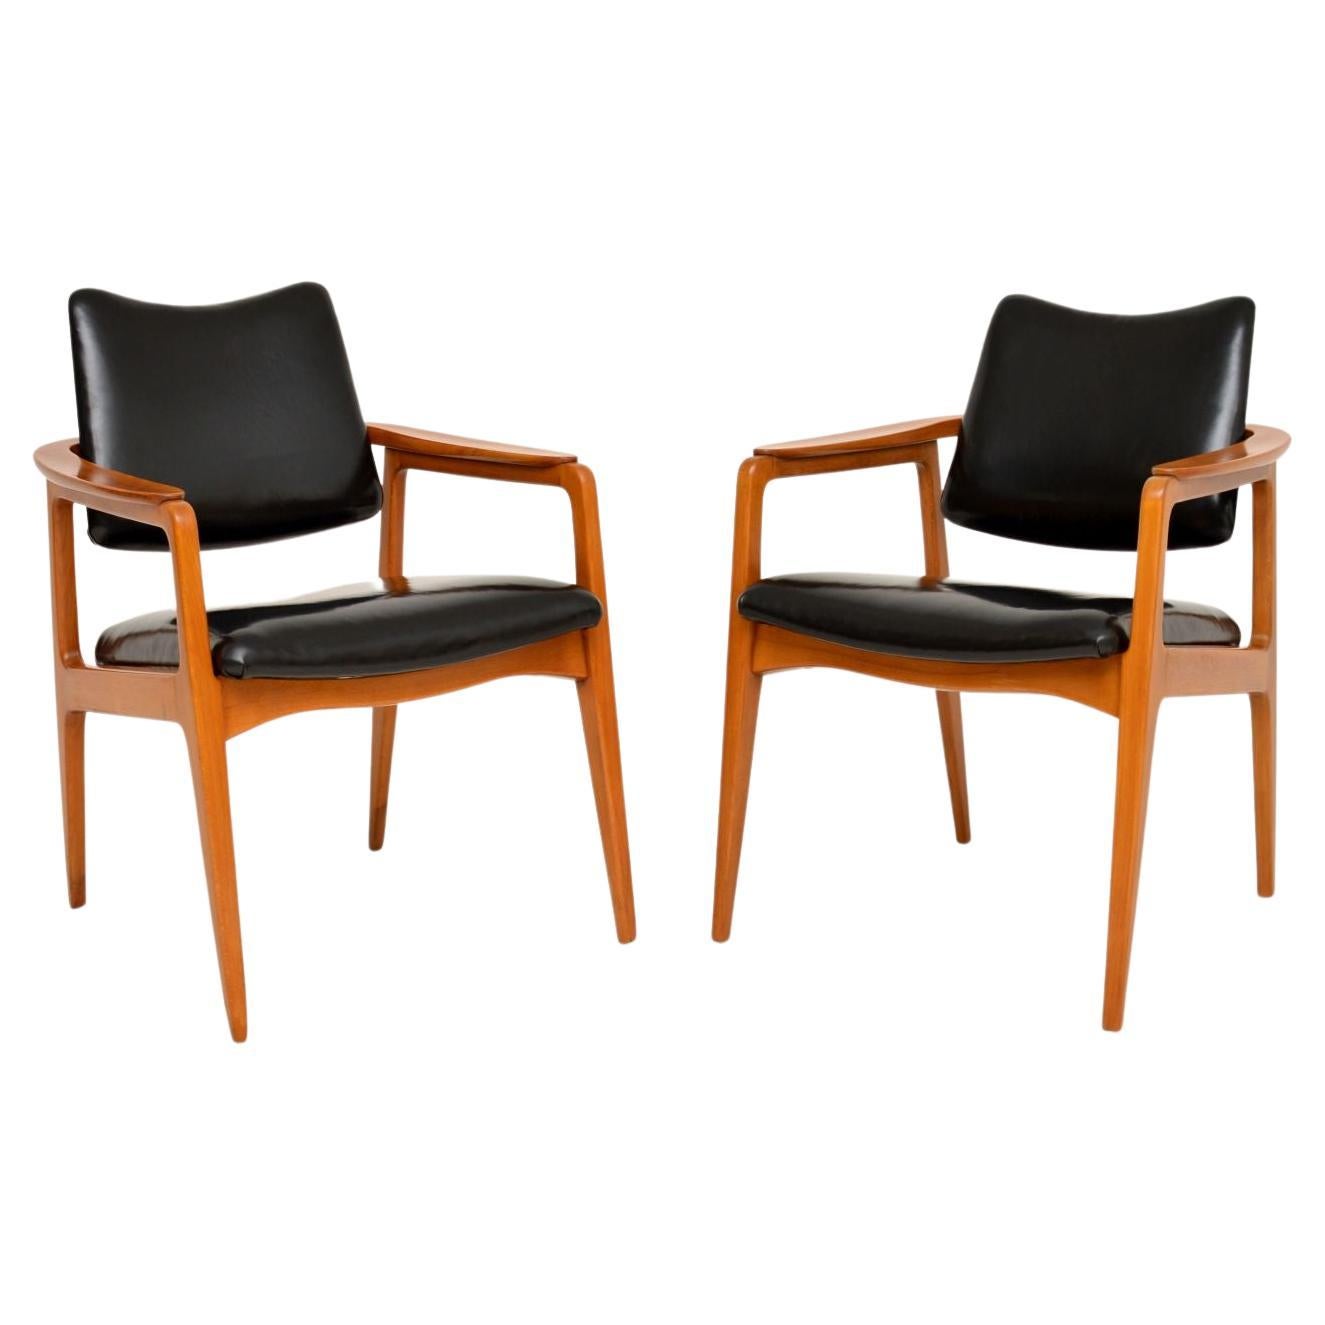 1950's Pair of Danish Leather Armchairs by Sigvard Bernadotte